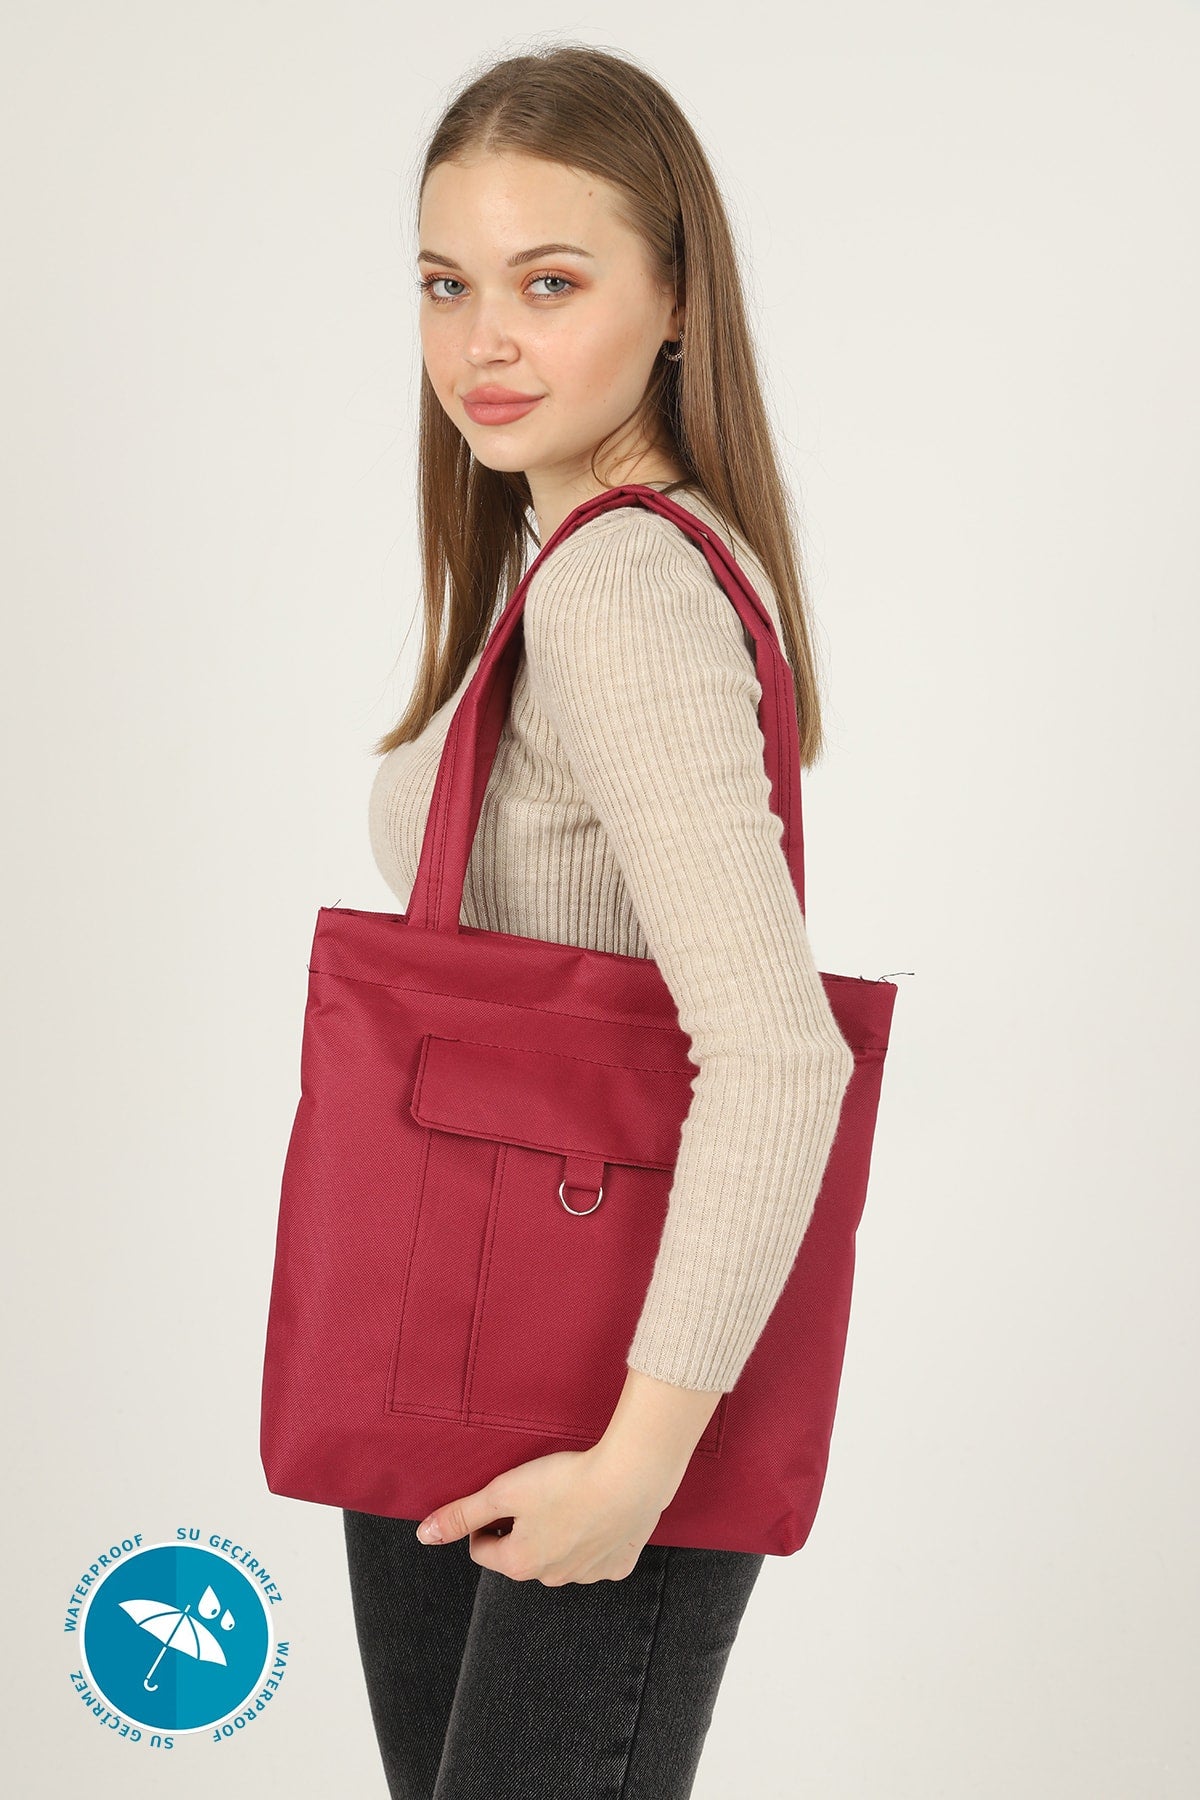 Claret Red U7 2-Compartment Large Volume Waterproof Fabric Women's Sports Daily Arm and Shoulder Bag B:35 E:35